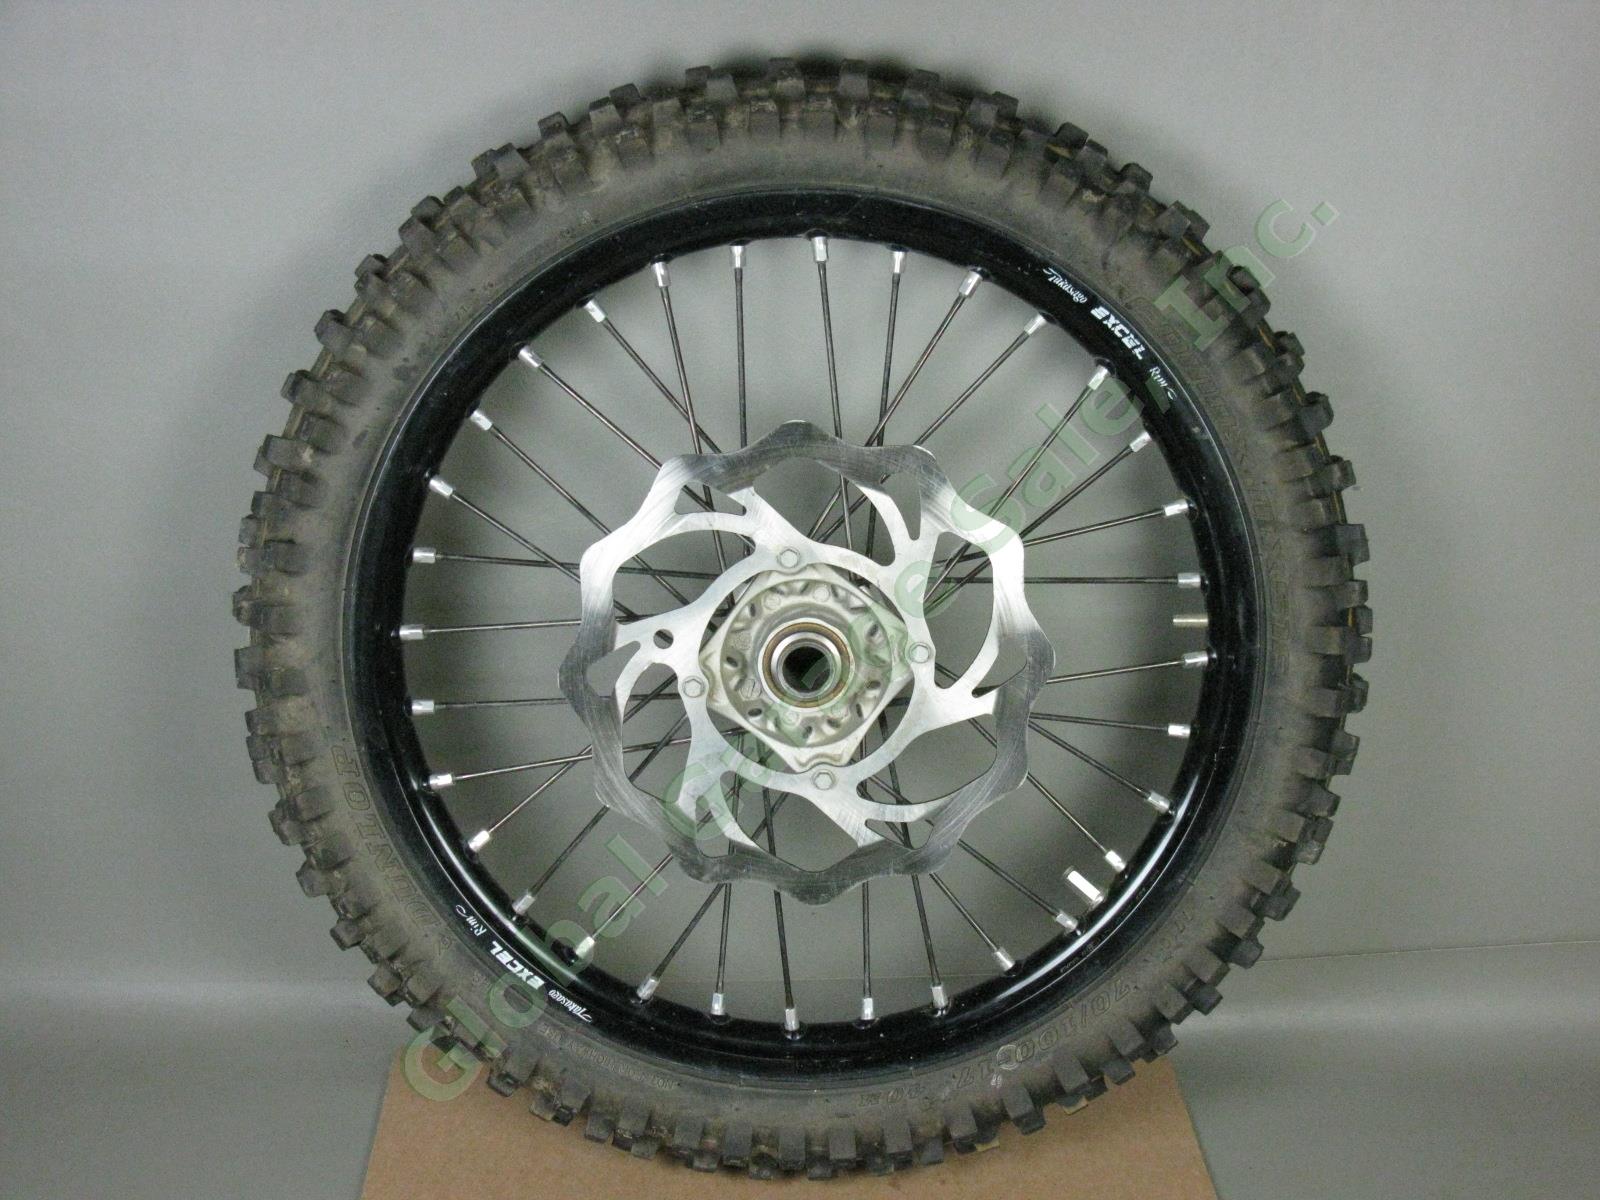 2013-2016 KTM-85 Takasago Excel Black Front Wheel J 17x1.40 + Tire Used One Lap!